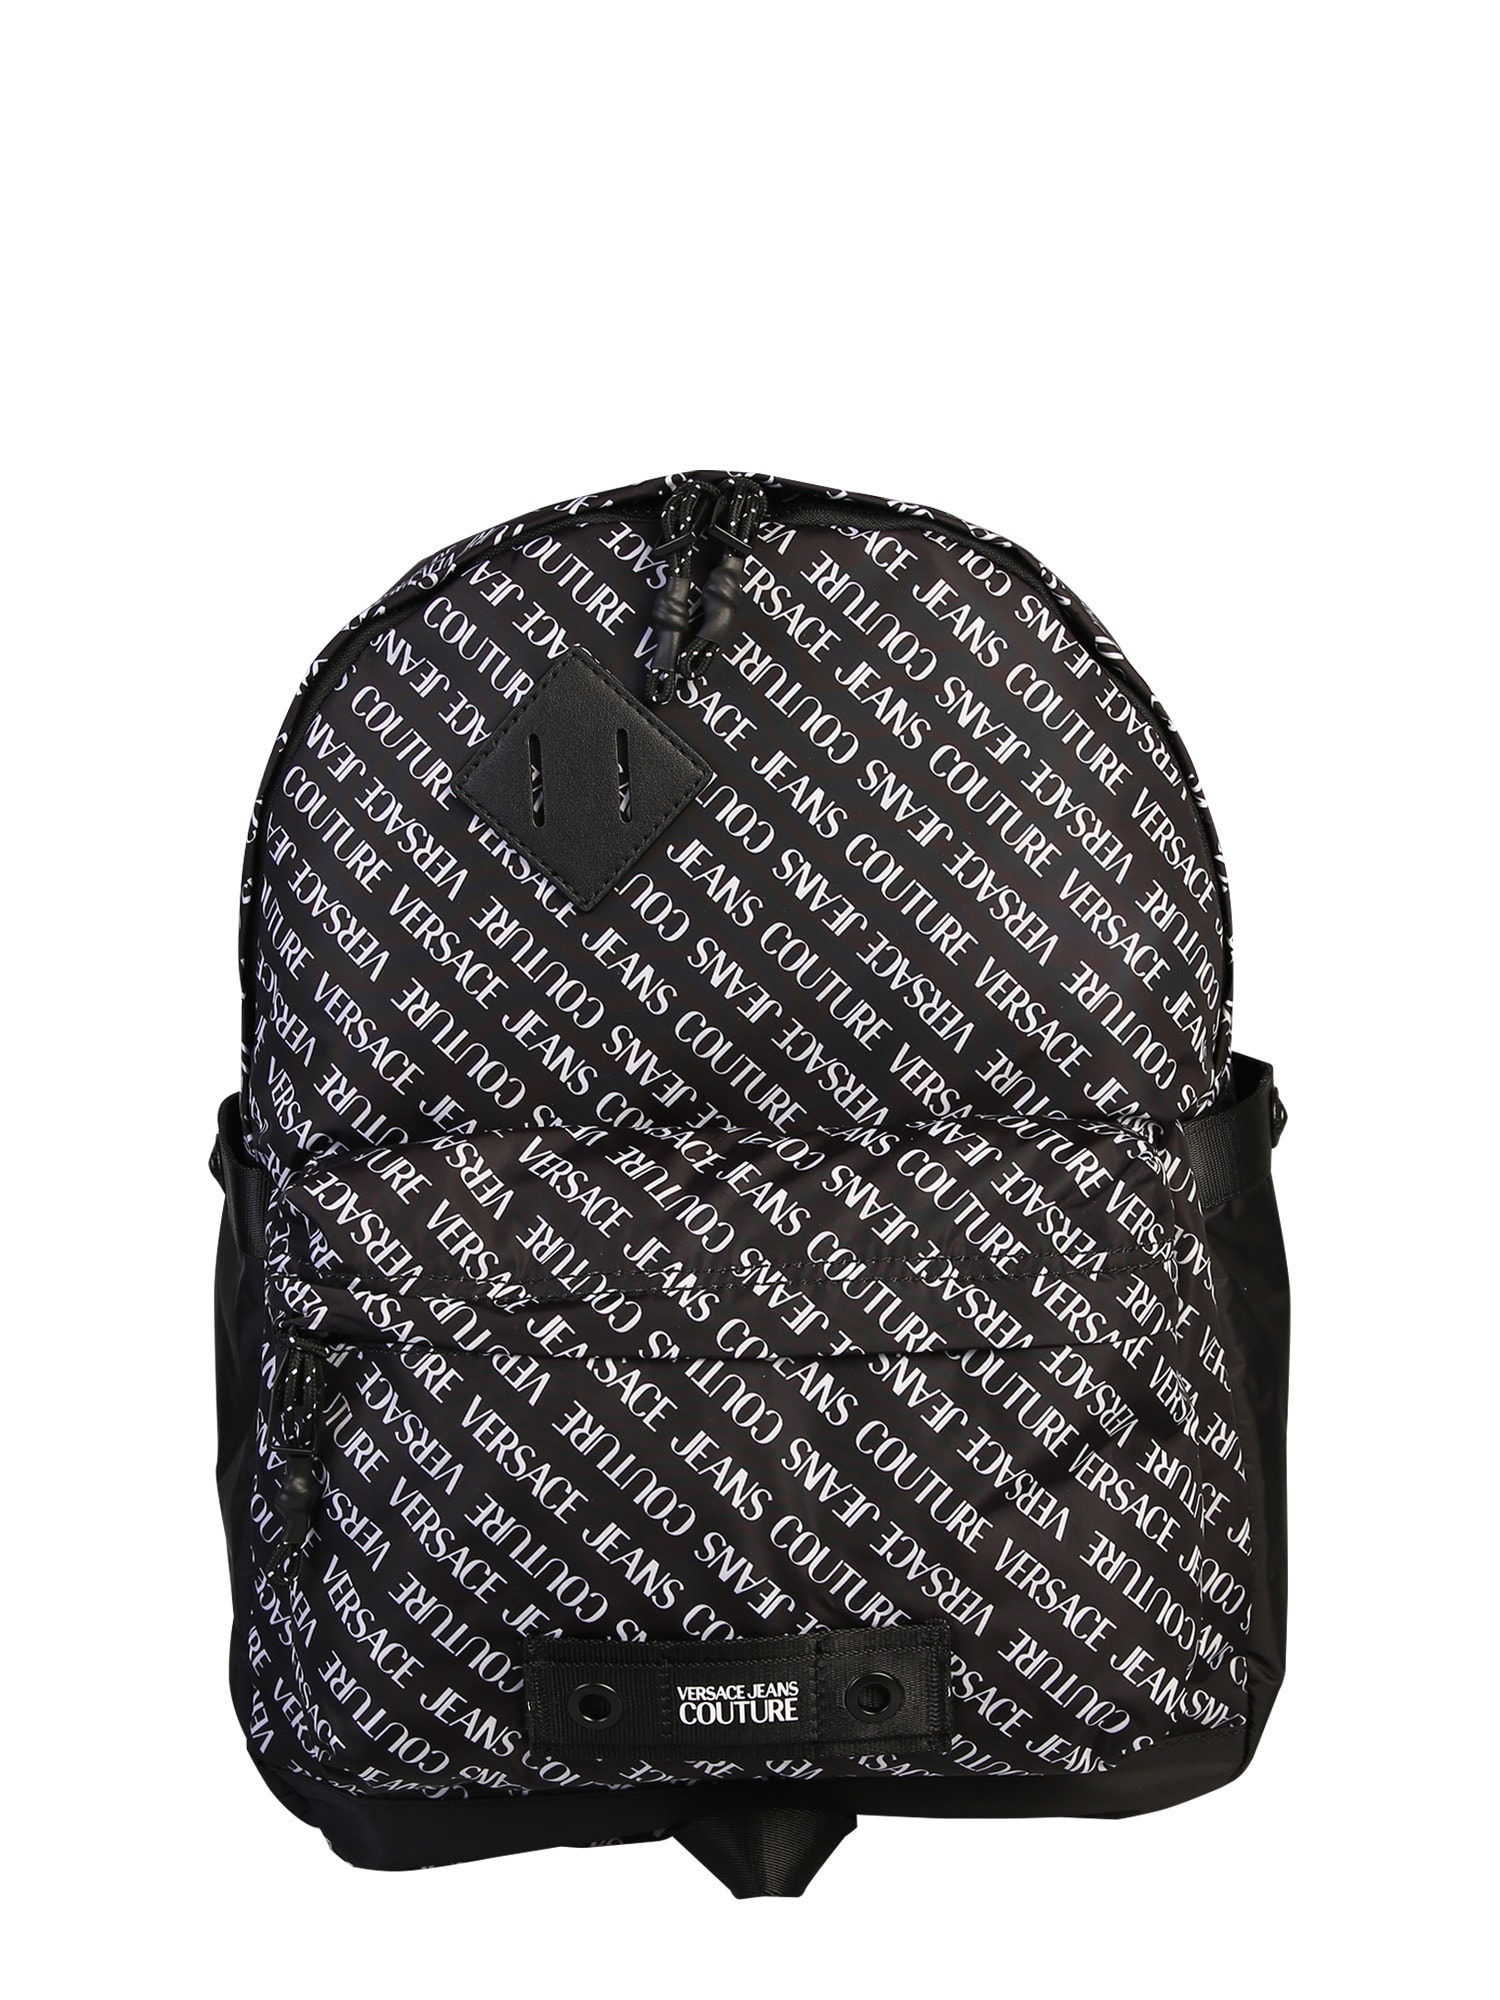 Versace Jeans Couture Printed Backpack